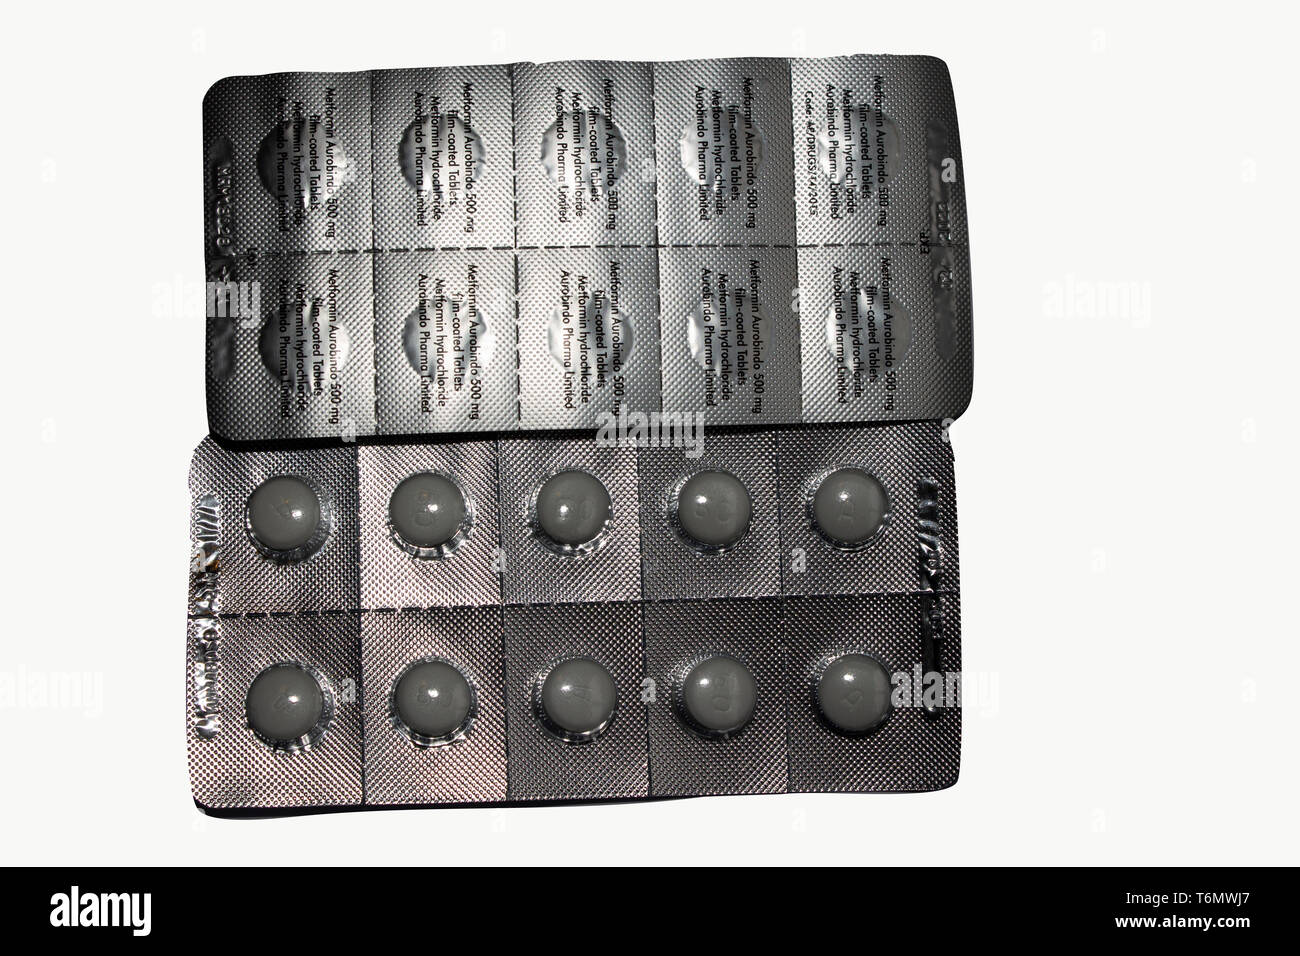 Tablet blister packets of 60mg doses each of Metaformin a popular Diabetes drug treatment isolated against a white background. Stock Photo